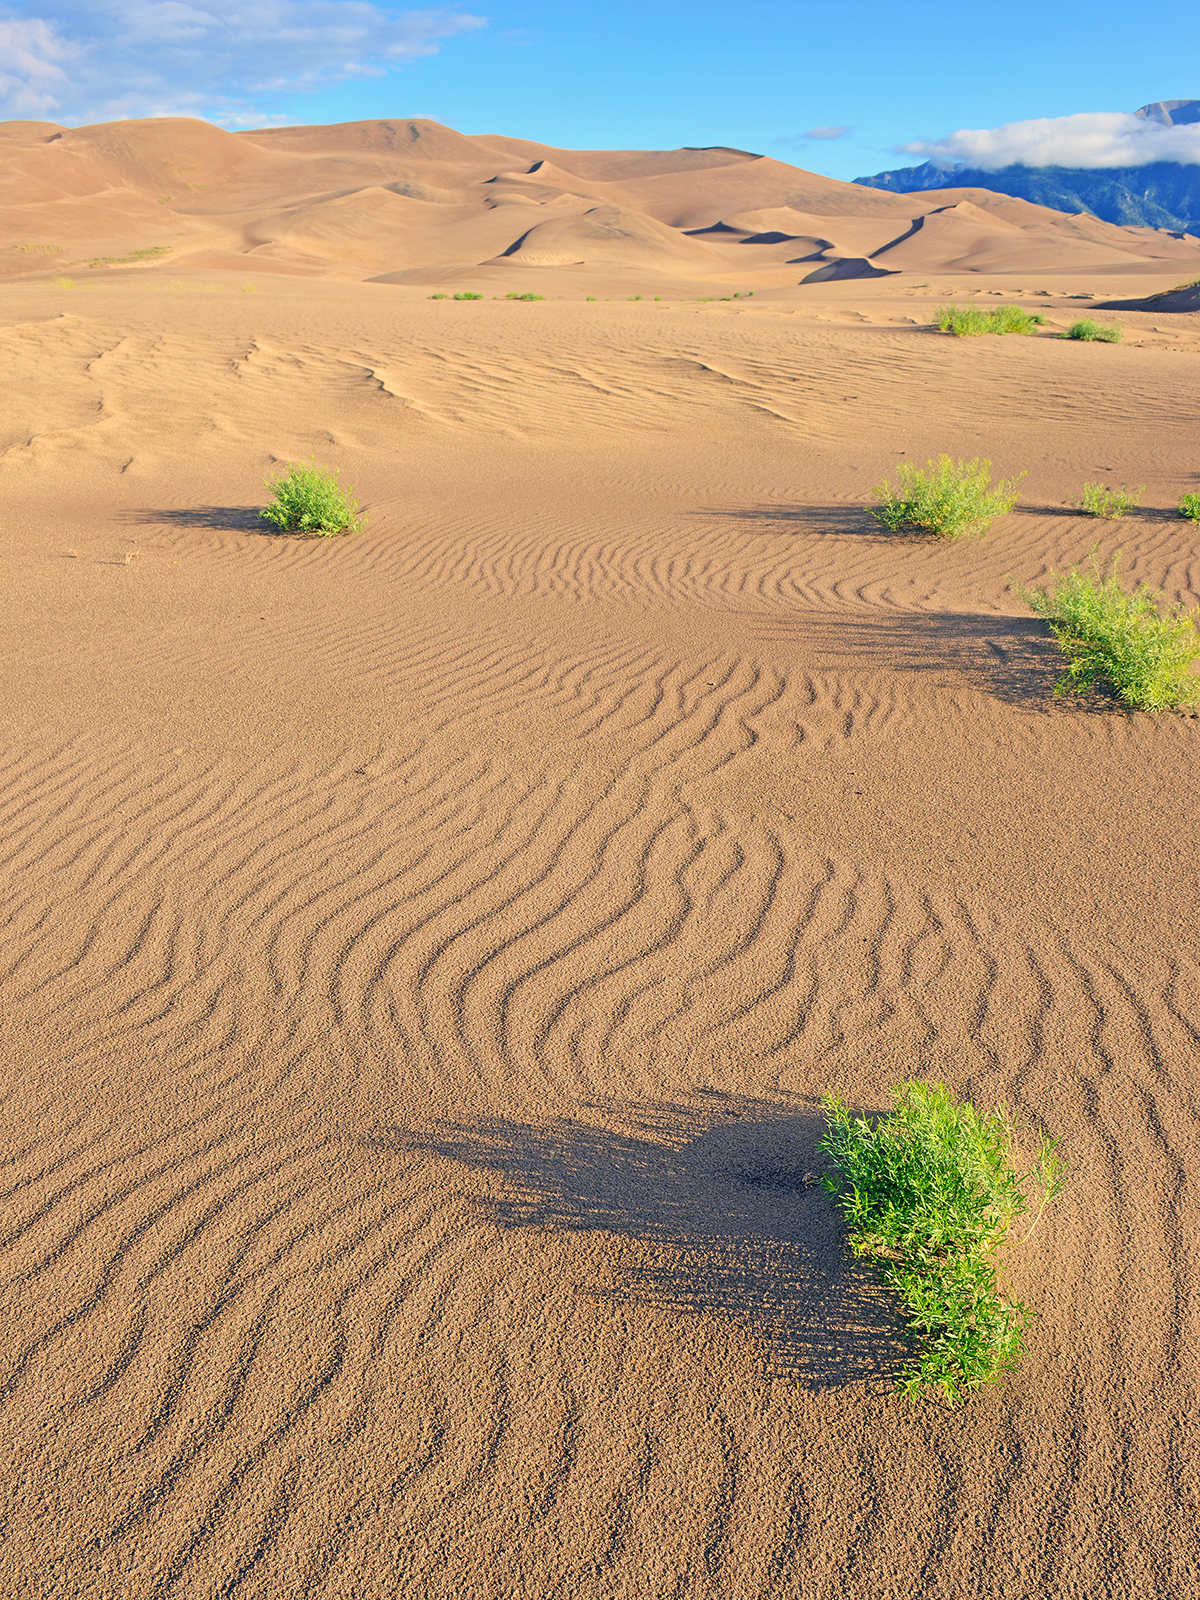 wavy sand with green bushes and sand dunes in distance